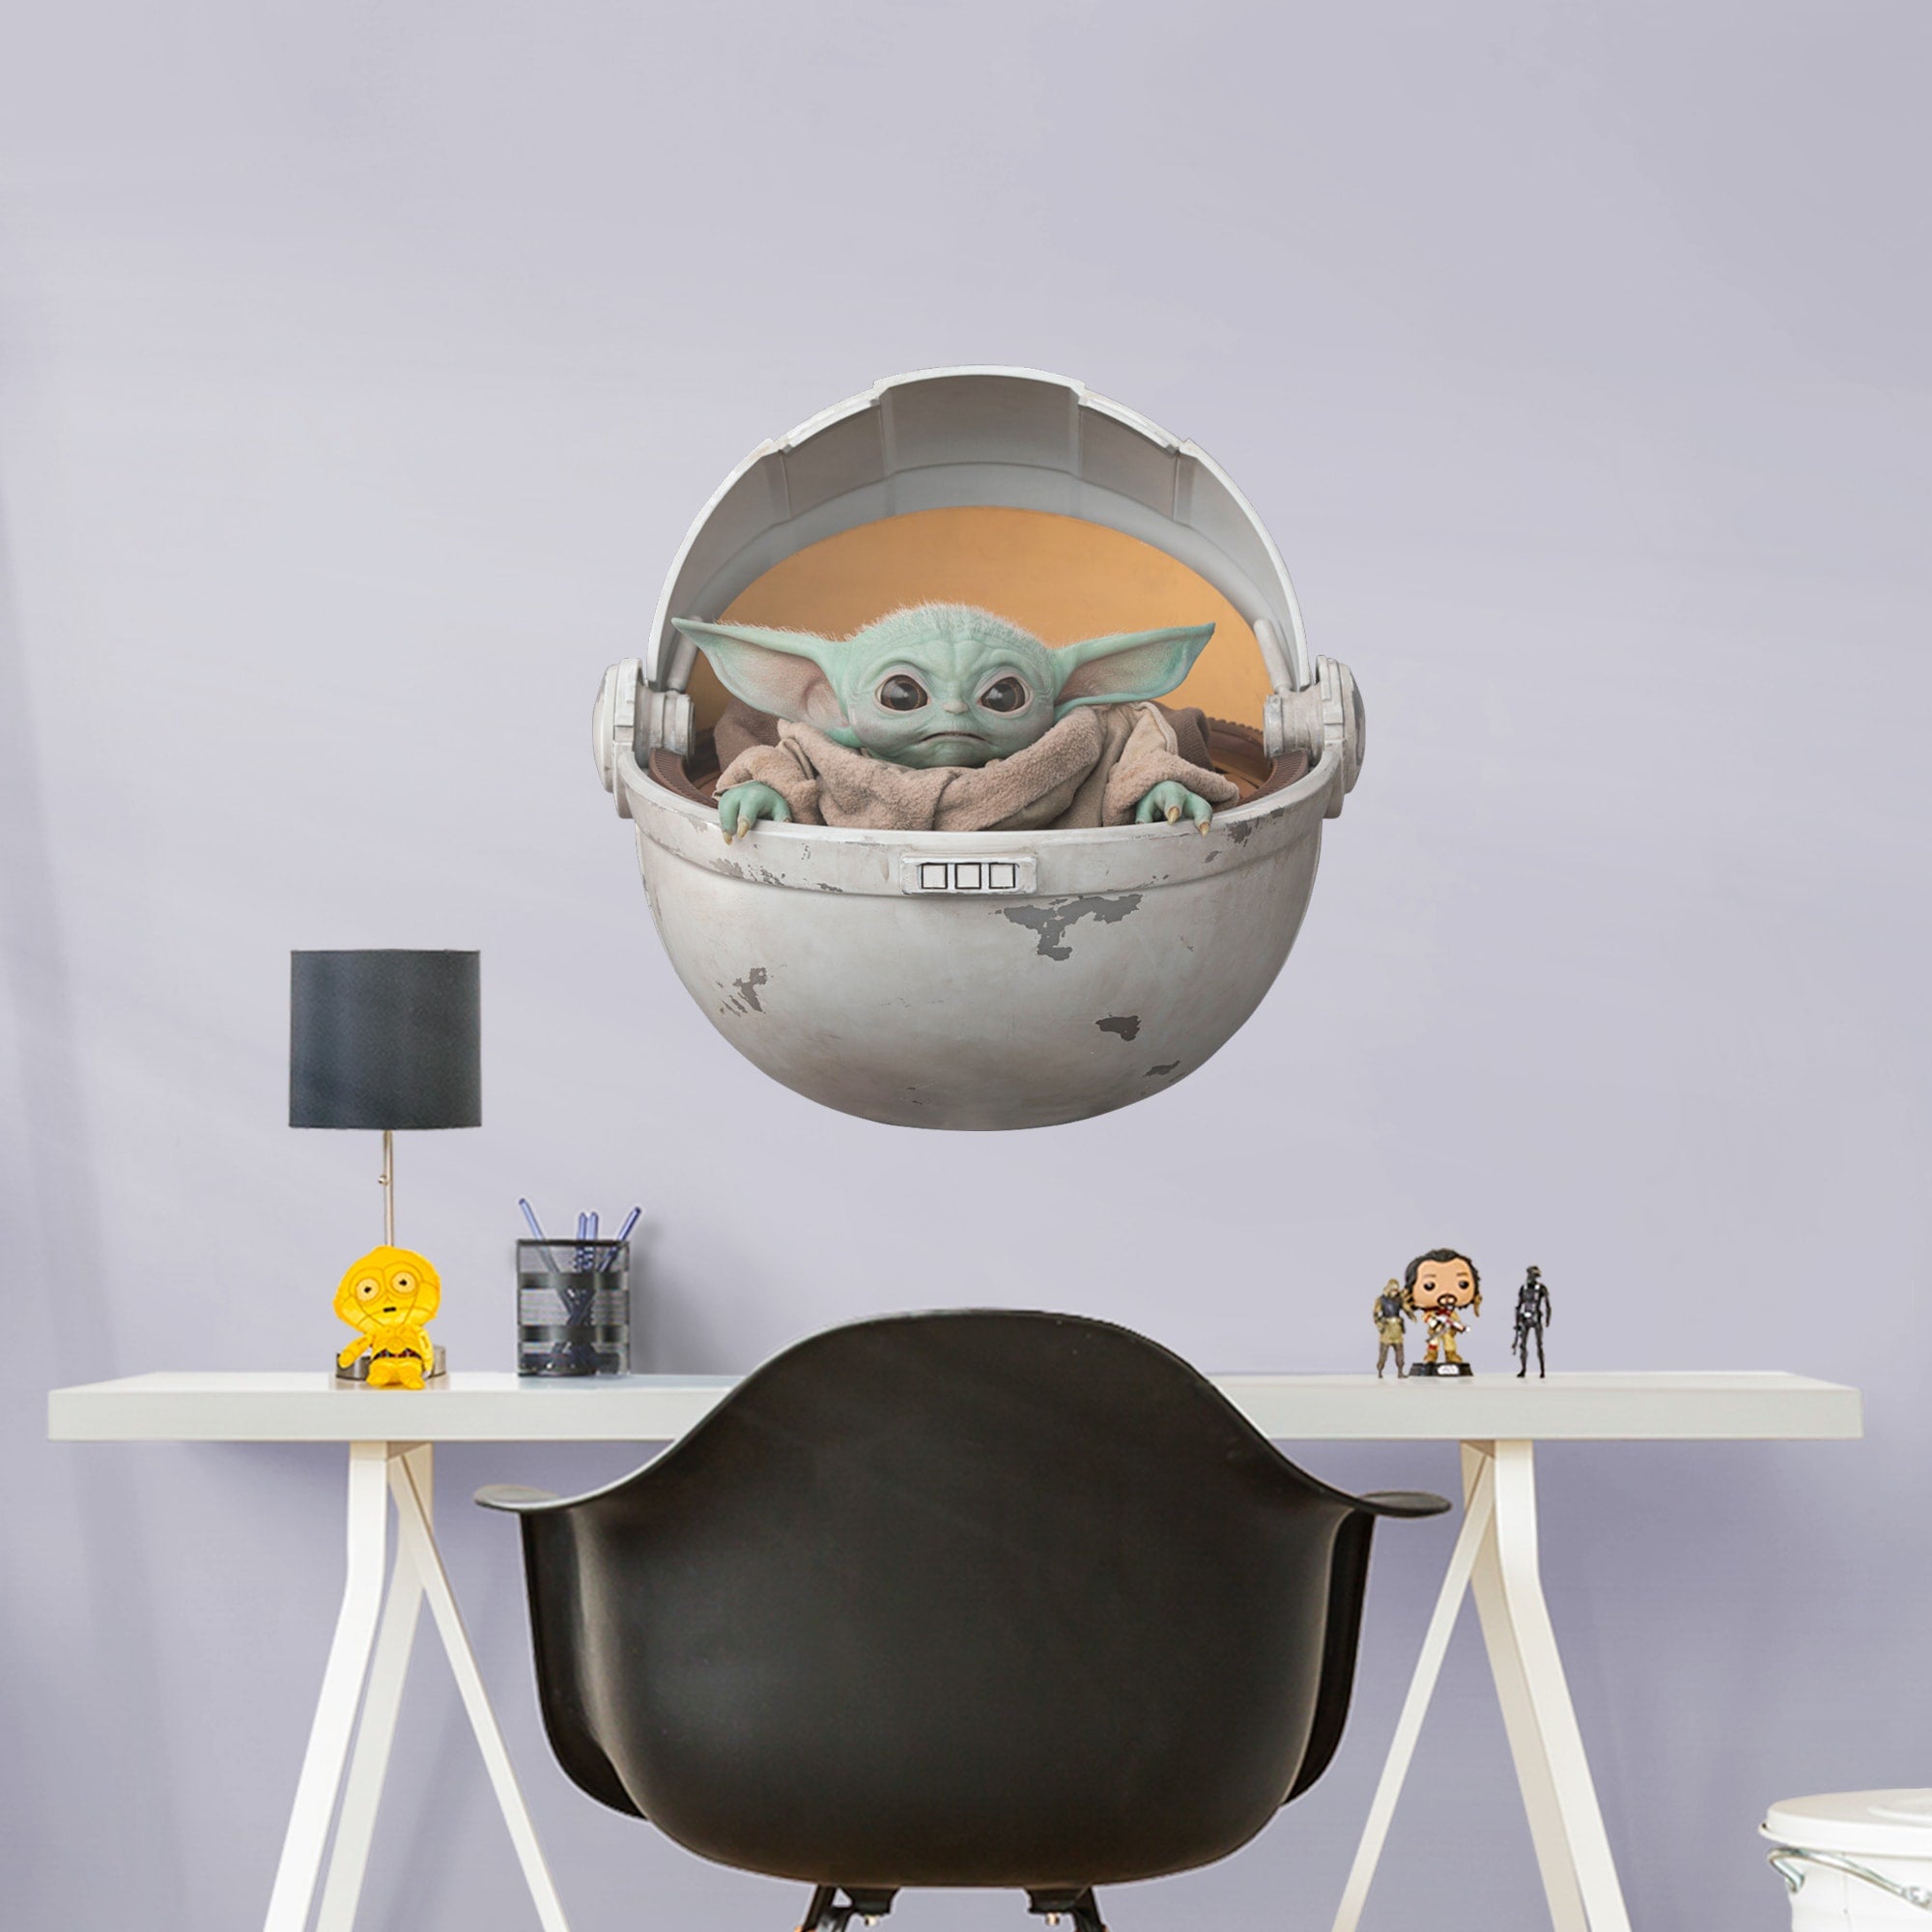 The Child in Pod - Star Wars: The Mandalorian - Officially Licensed Removable Wall Decal 25.0"W x 25.0"H by Fathead | Vinyl